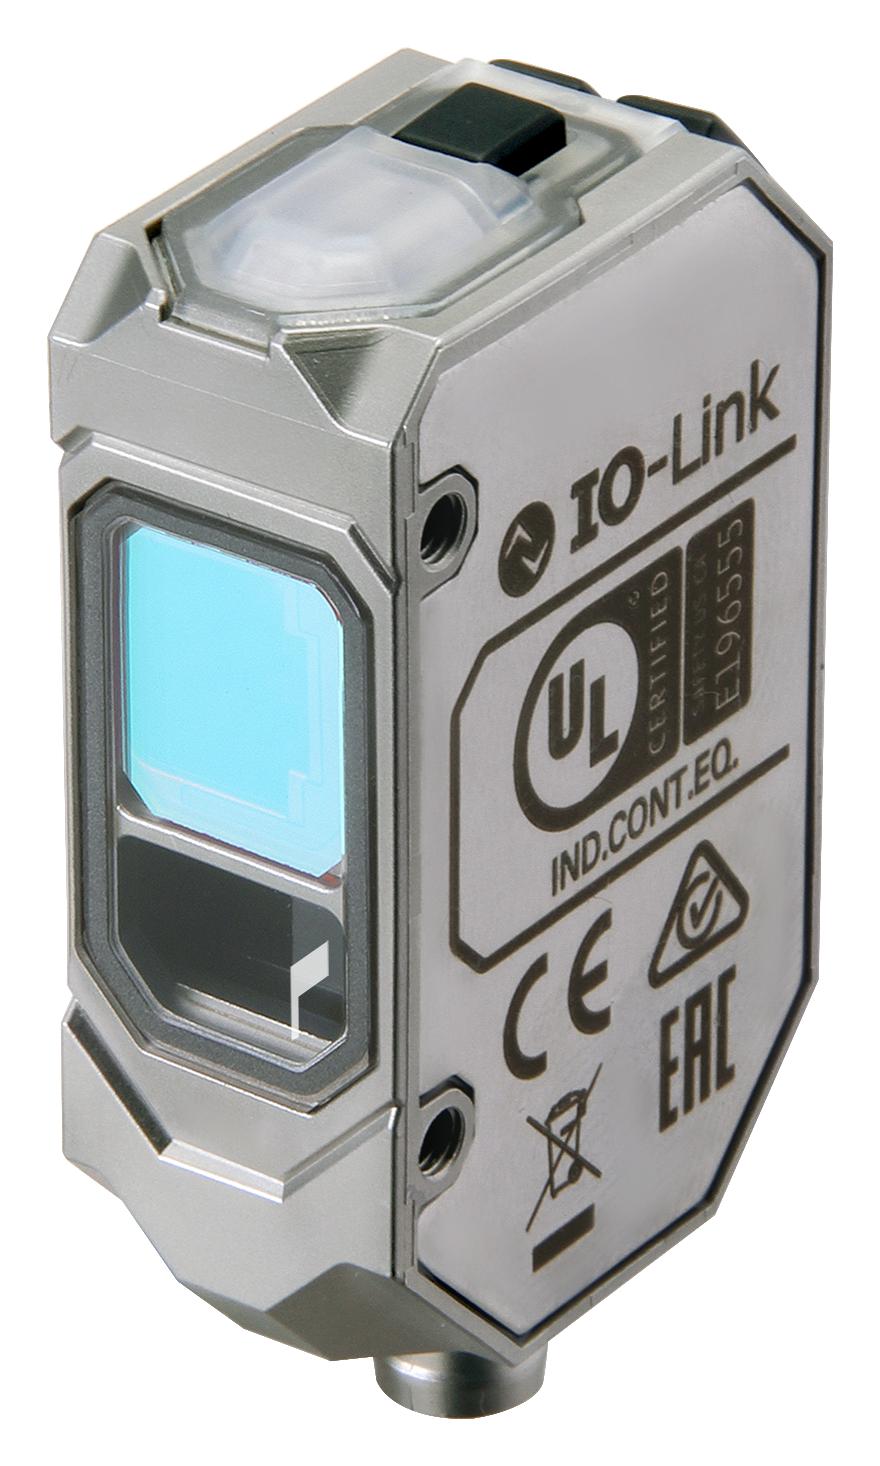 Omron Industrial Automation E3As-Hl150Mt M3 Photo Sensor, Triangulation, M8, 150mm